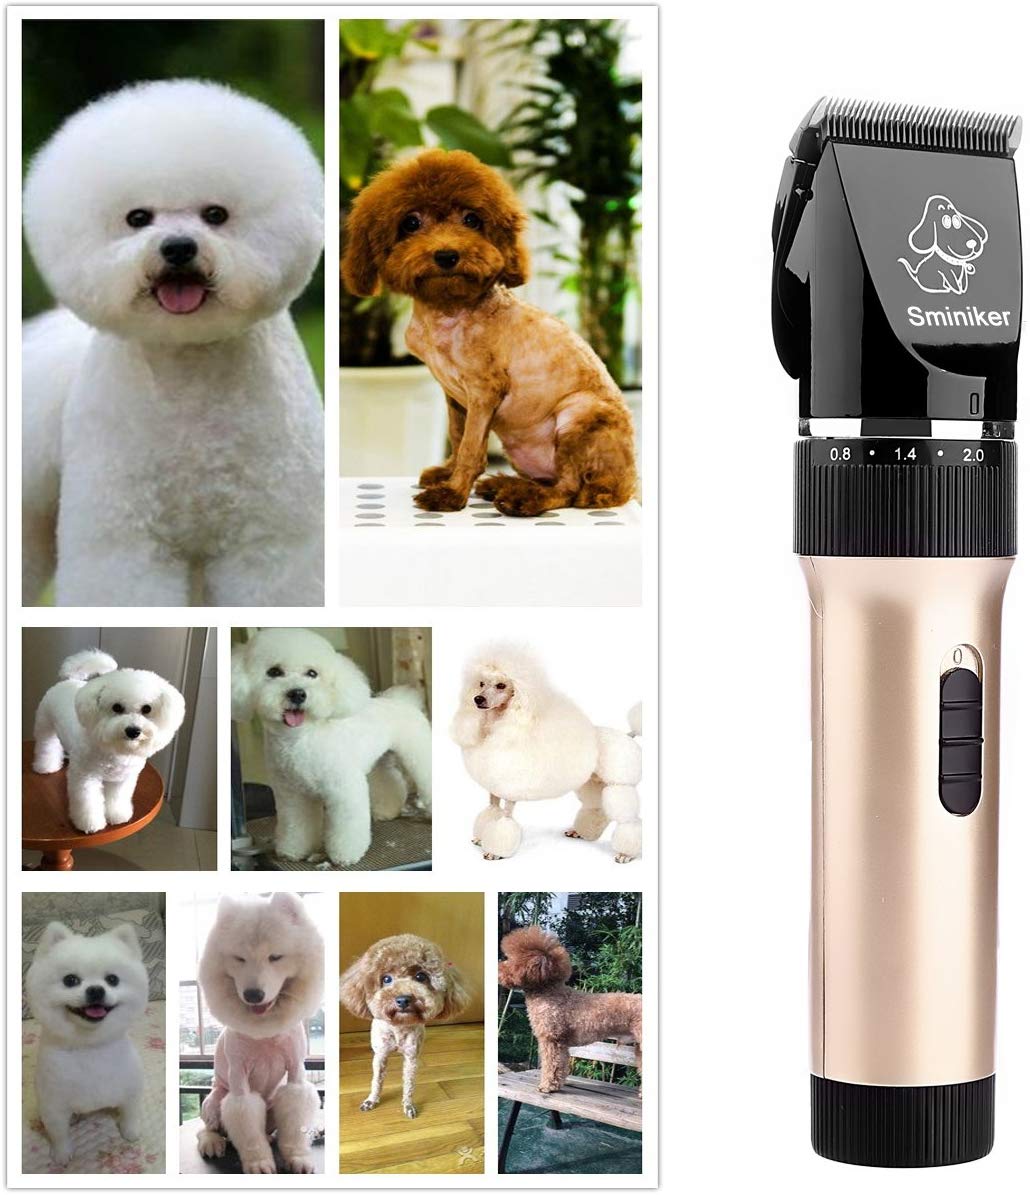 sminiker low noise cordless dog clippers